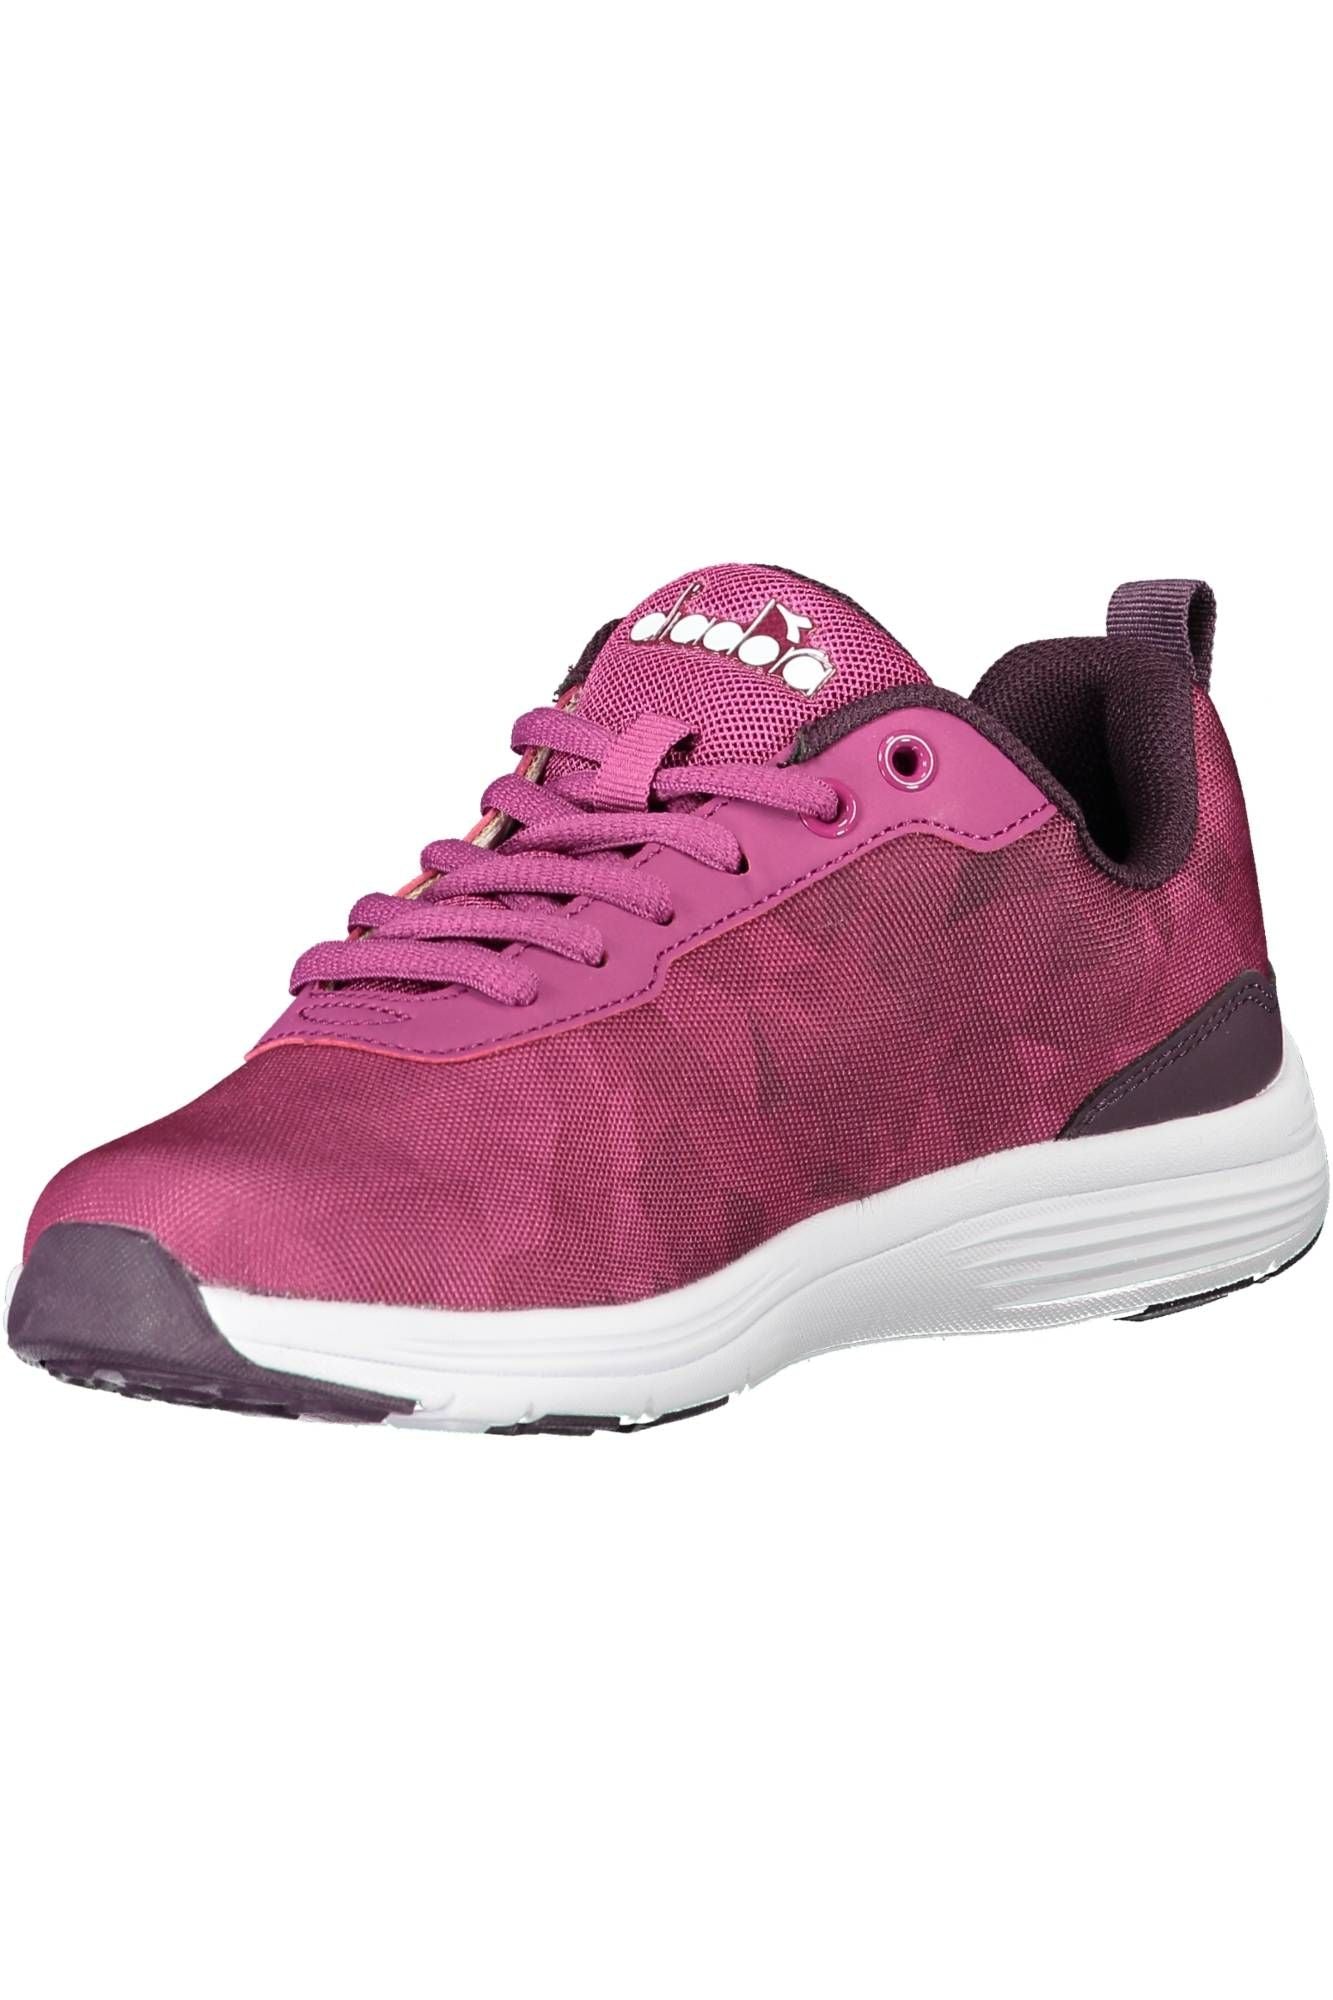 Chic Purple Sports Sneakers with Contrasting Sole